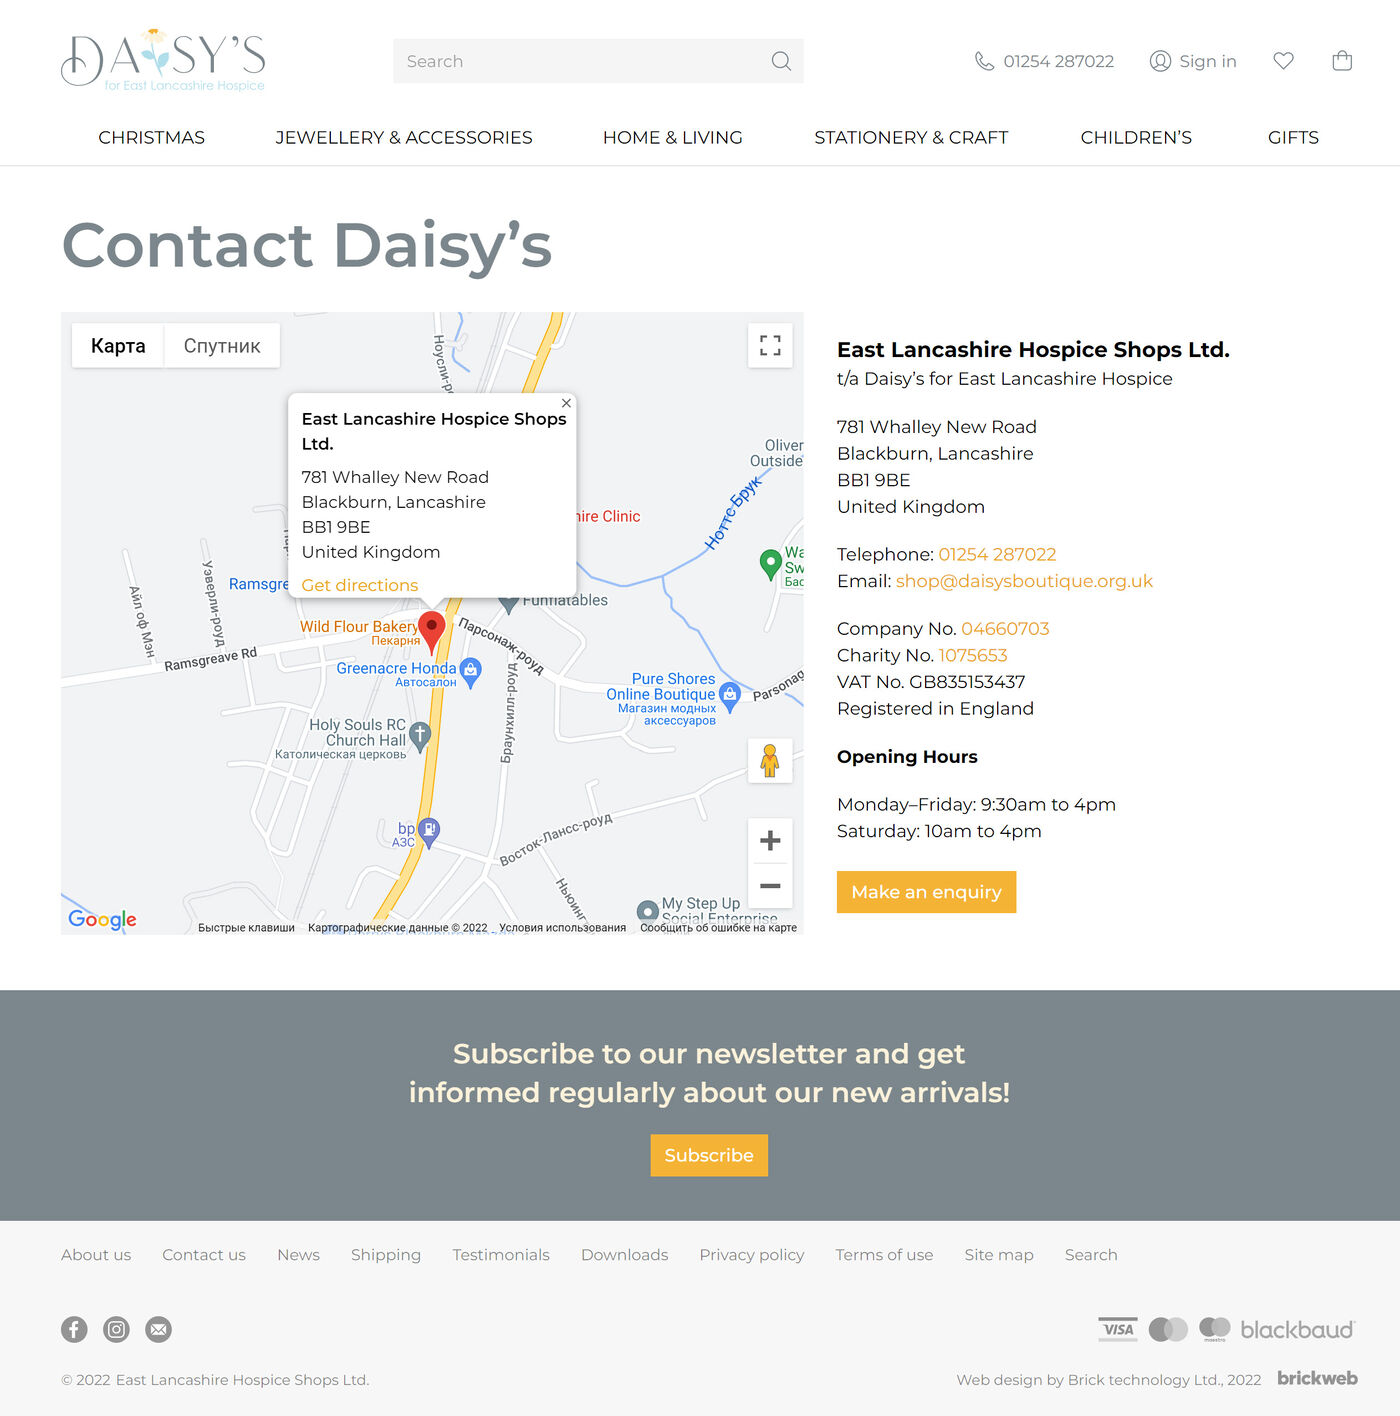 Daisy’s for East Lancashire Hospice Contact us